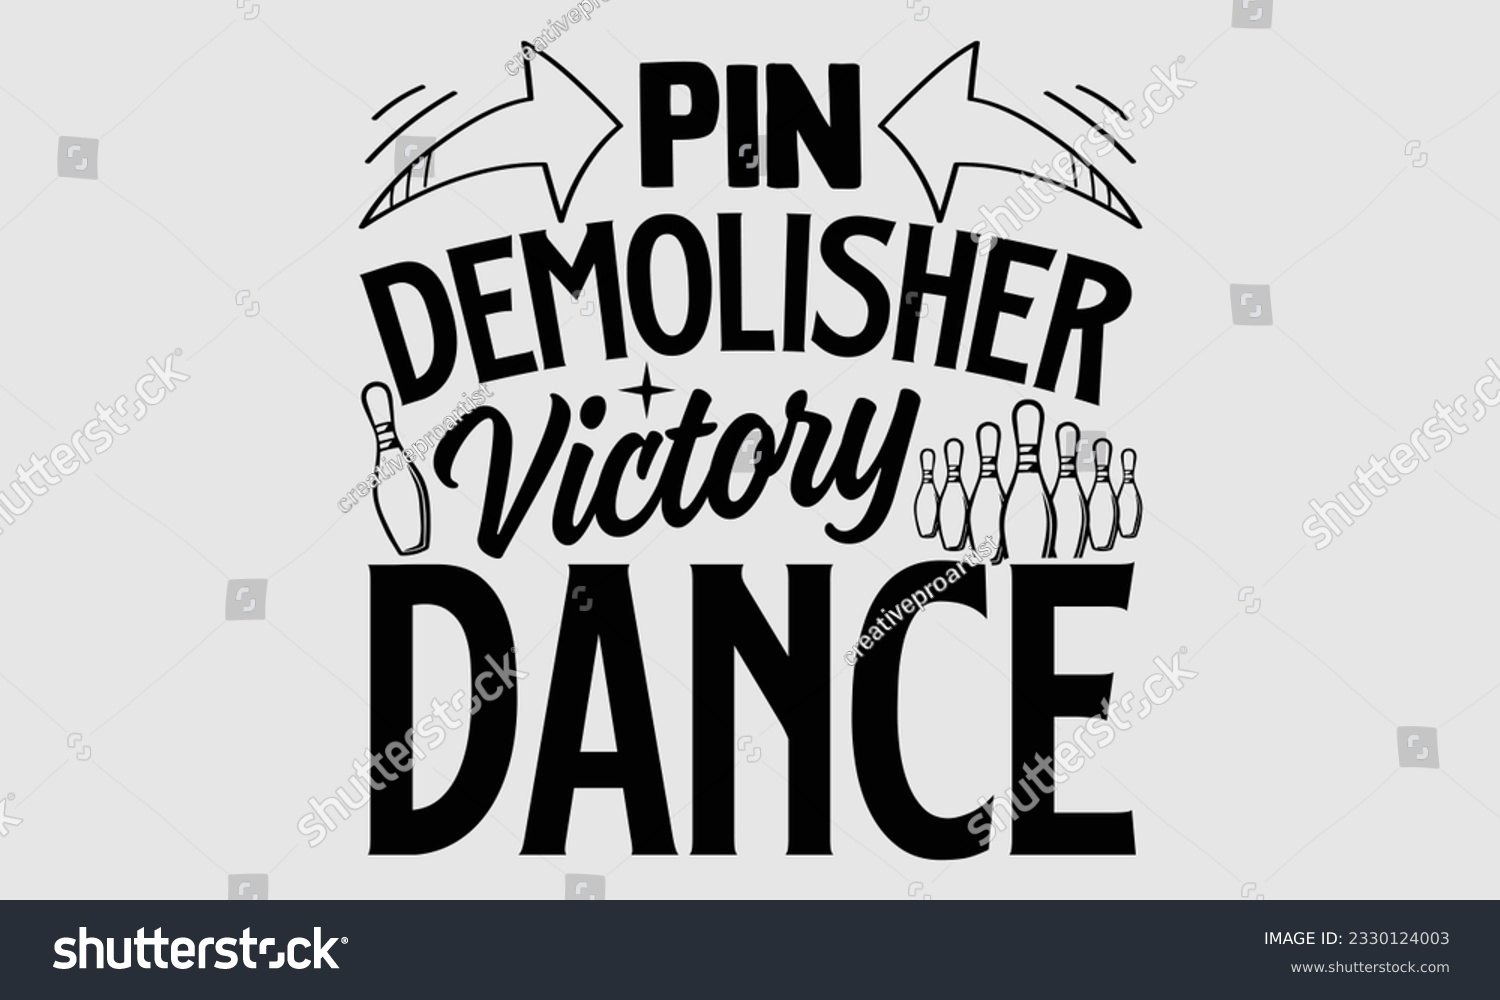 SVG of Pin Demolisher Victory Dance- Bowling t-shirt design, Illustration for prints on SVG and bags, posters, cards, greeting card template with typography text EPS svg